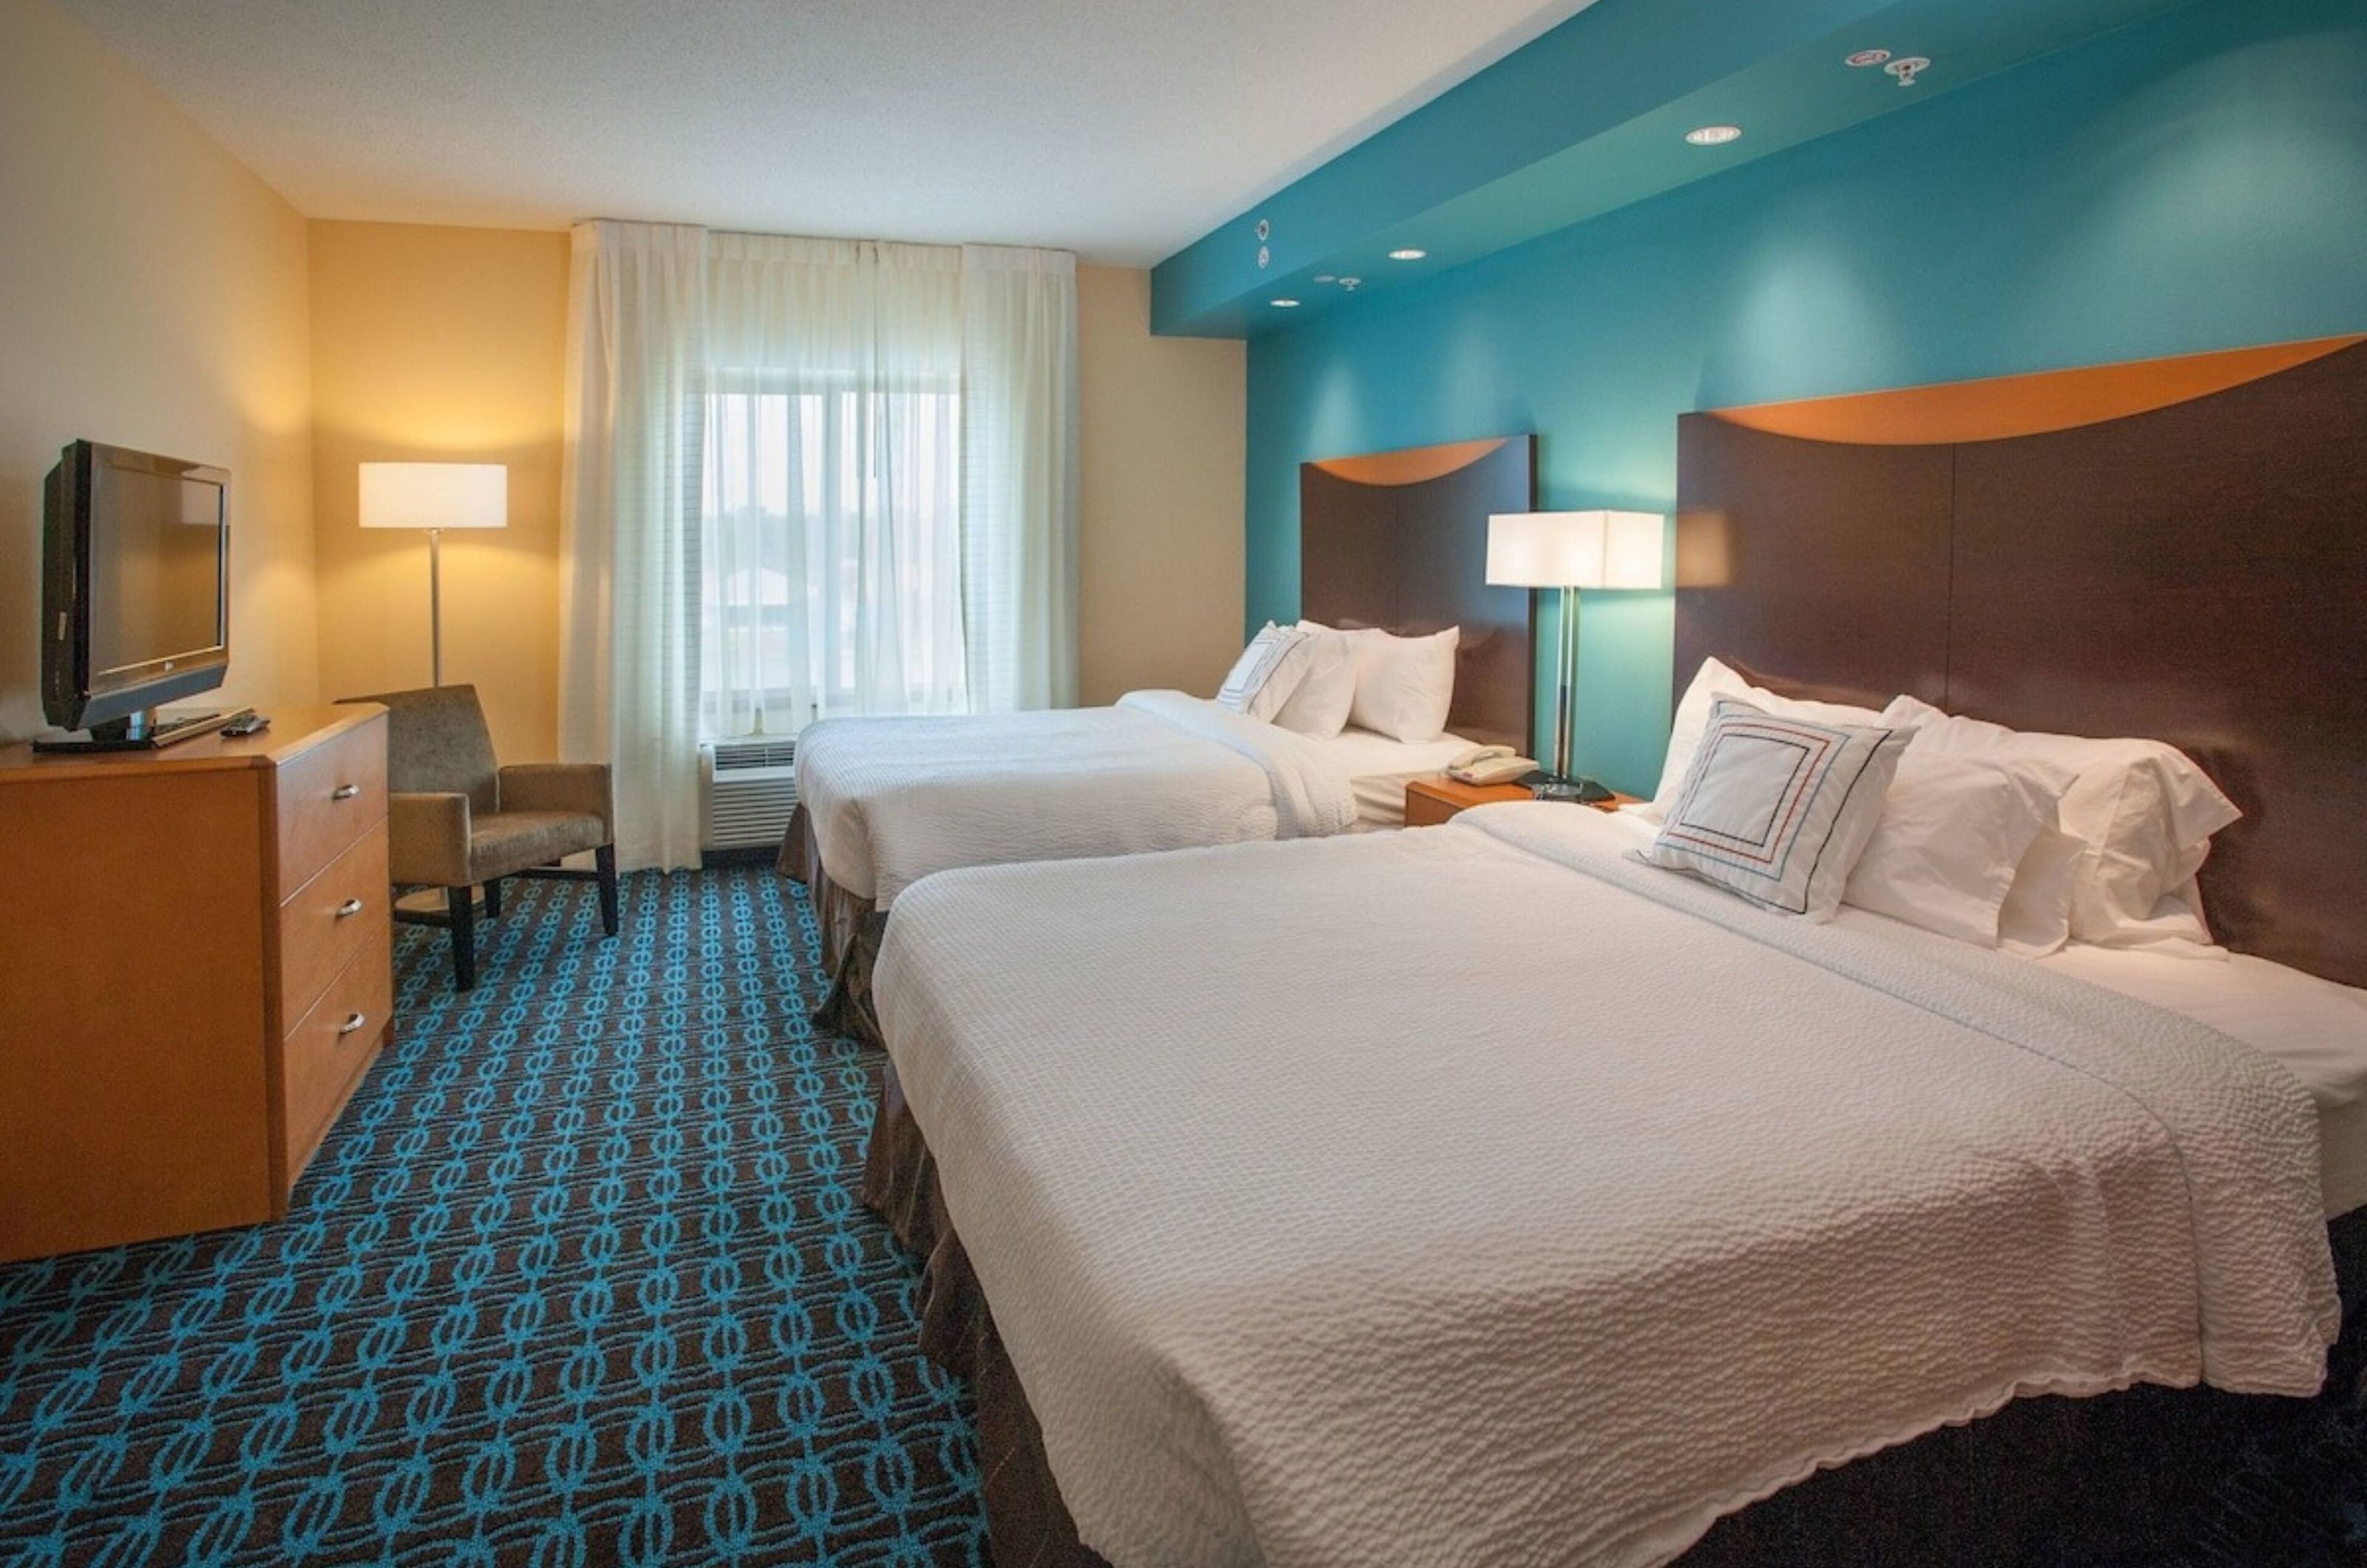 A room at Fairfield Inn and Suites with two beds in Orange Beach Alabama 